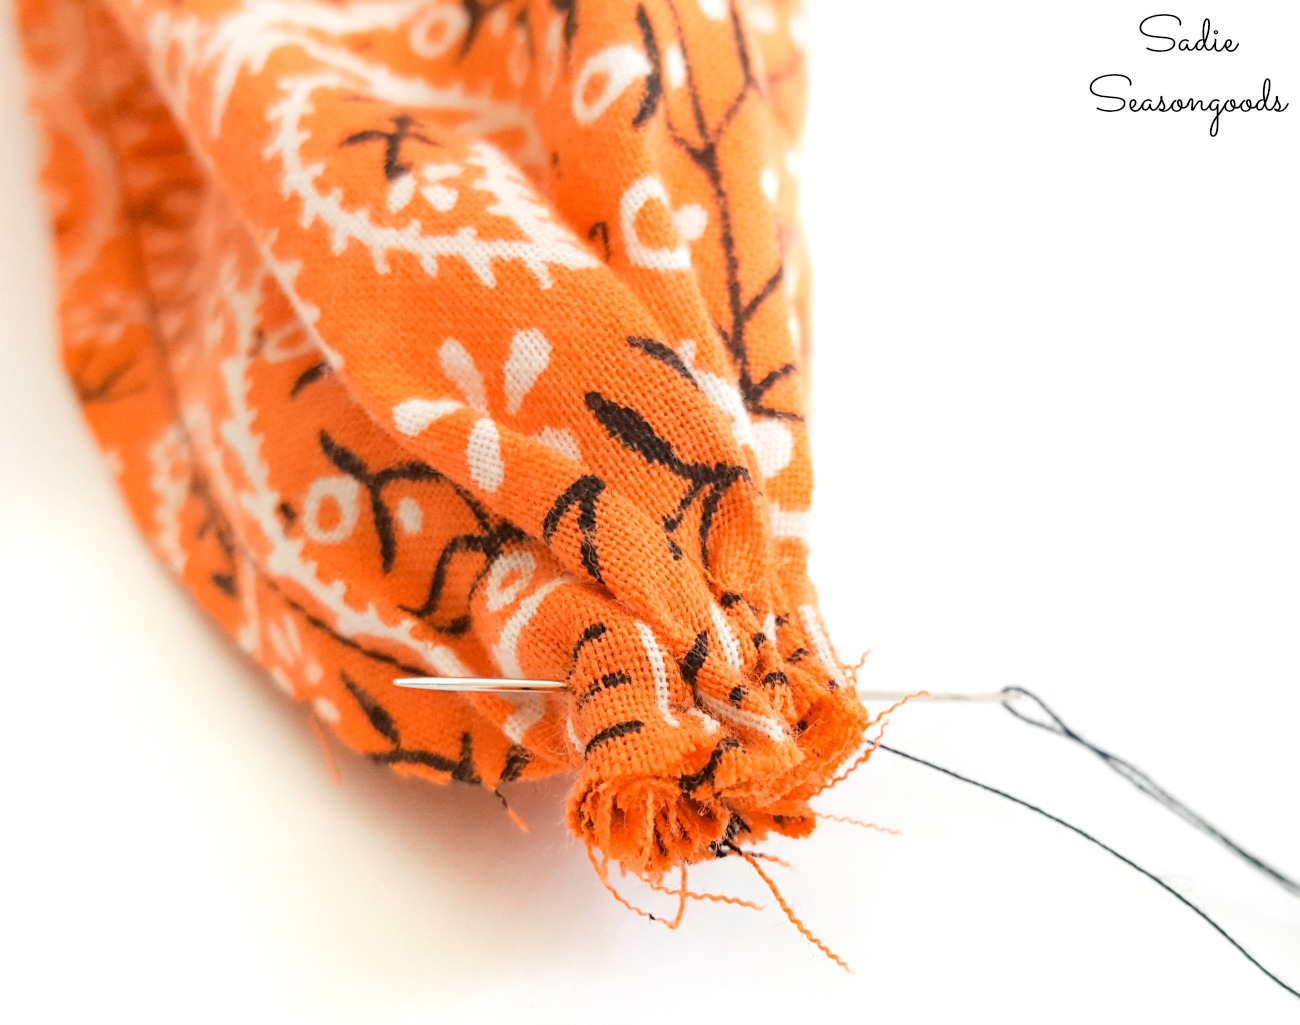 Closing up the bottom of the fabric pumpkin